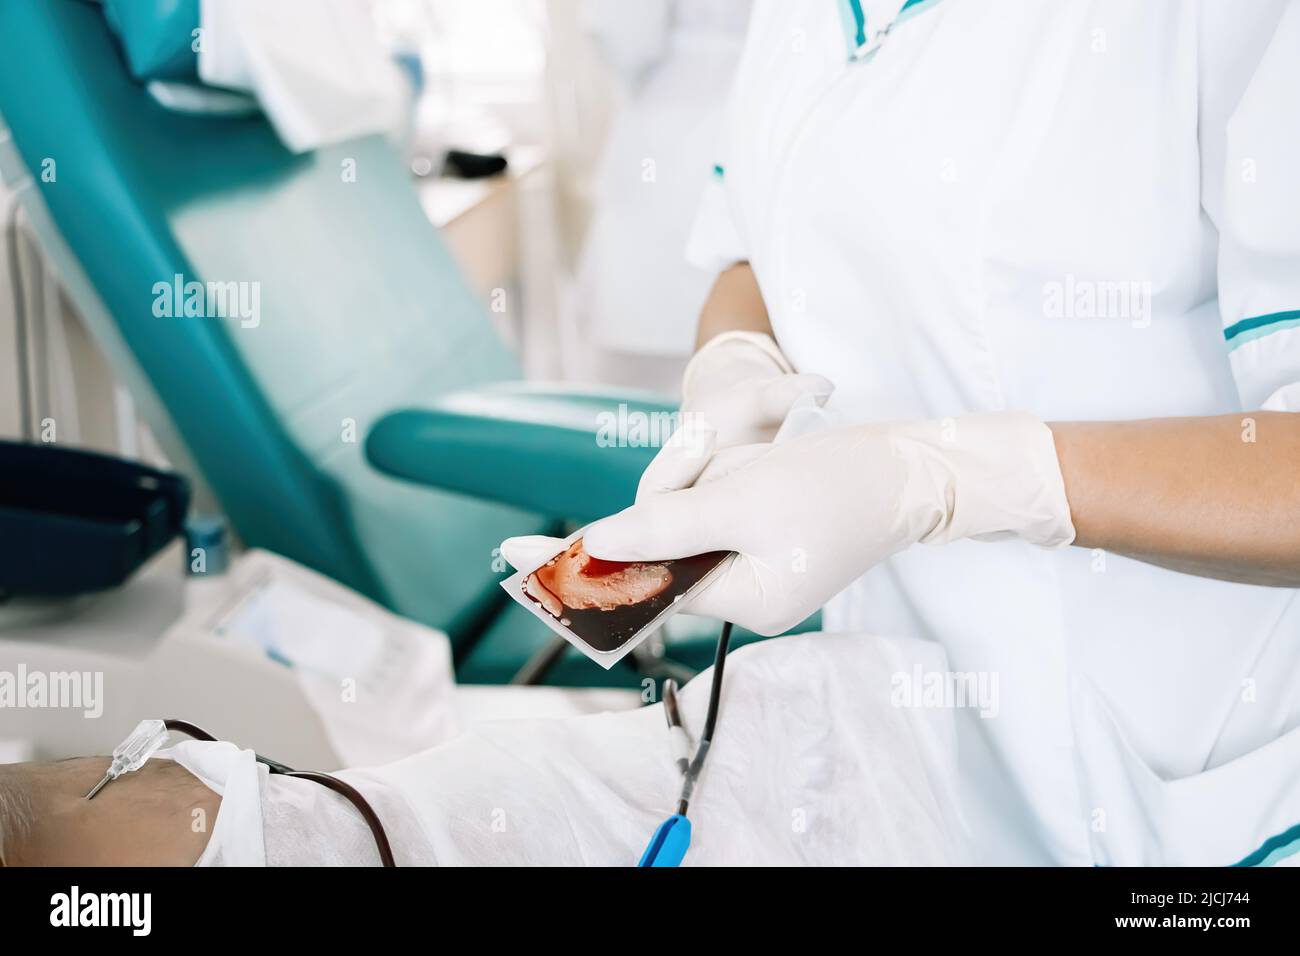 Nurse is holding blood bag in her hands. International Blood Donation Day. Process of blood transfusion in medical hospital. Stock Photo